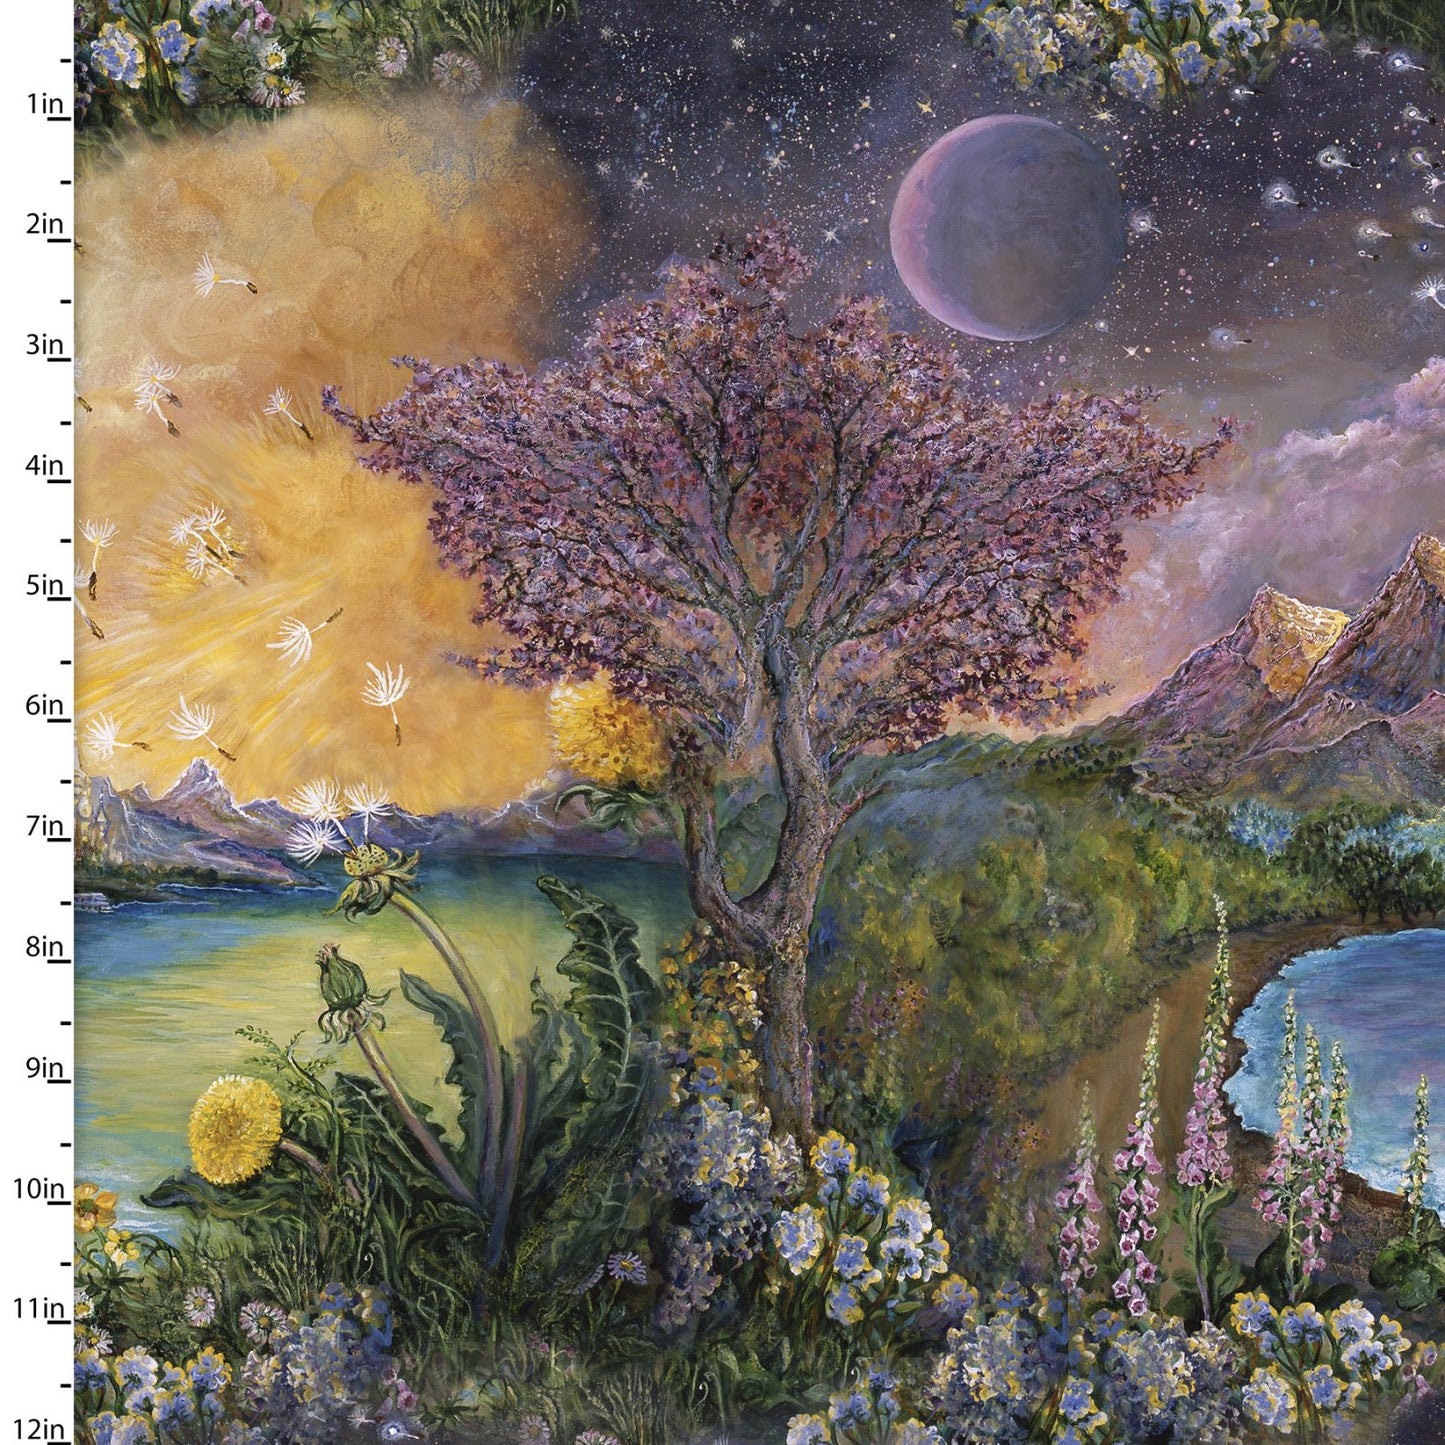 World of Wonder by Josephine Wall Scenic    18684-MLT Cotton Woven Fabric